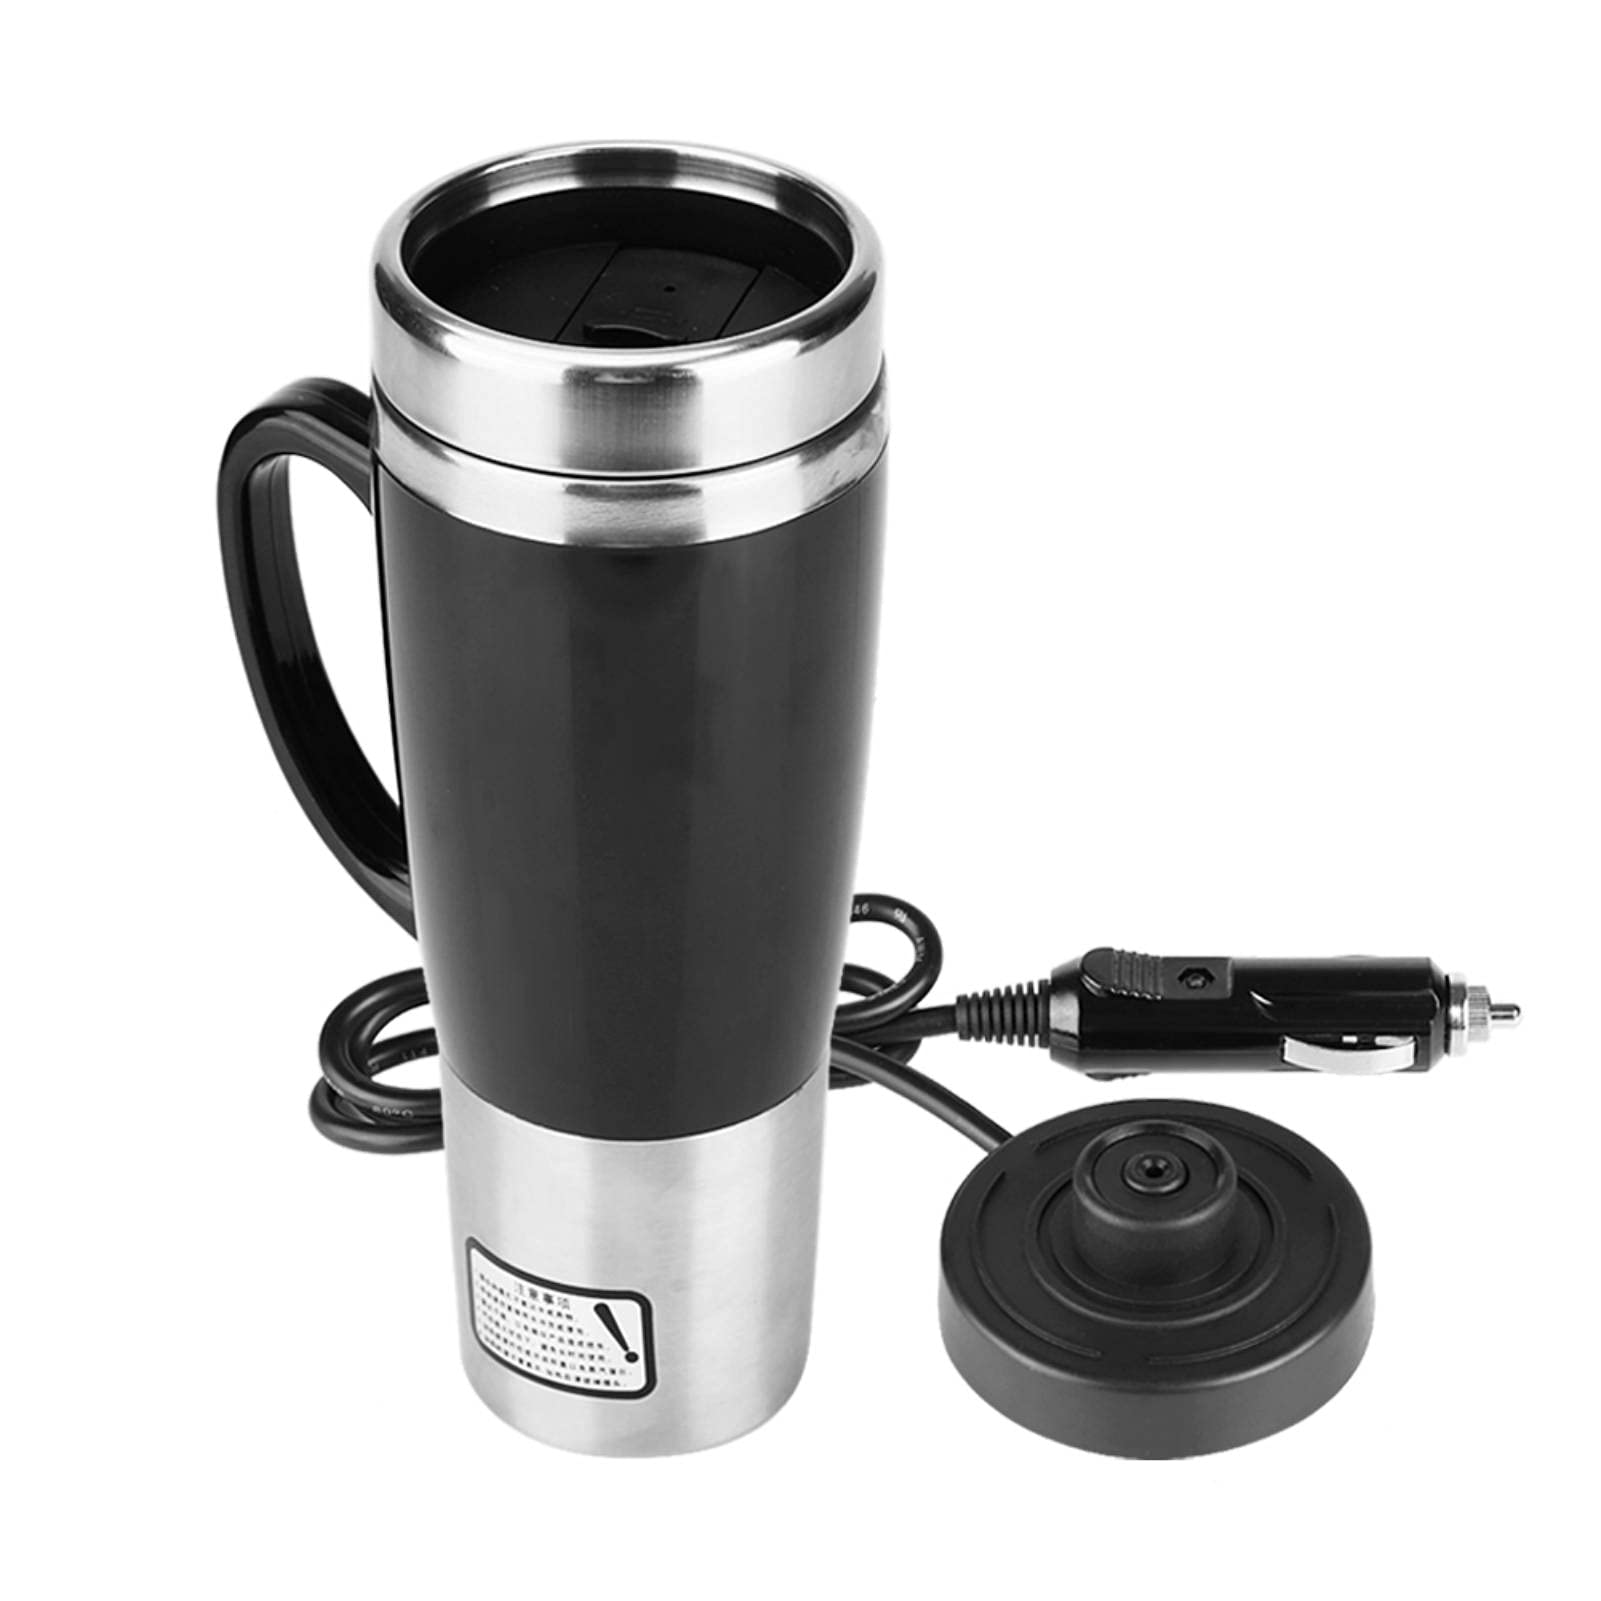 450ml Electric Heating Kettle Stainless Steel Electric In-car Kettle Travel Thermoses,Travel Kettle for Water Coffee Drinks Heating, 12 V von Garsent